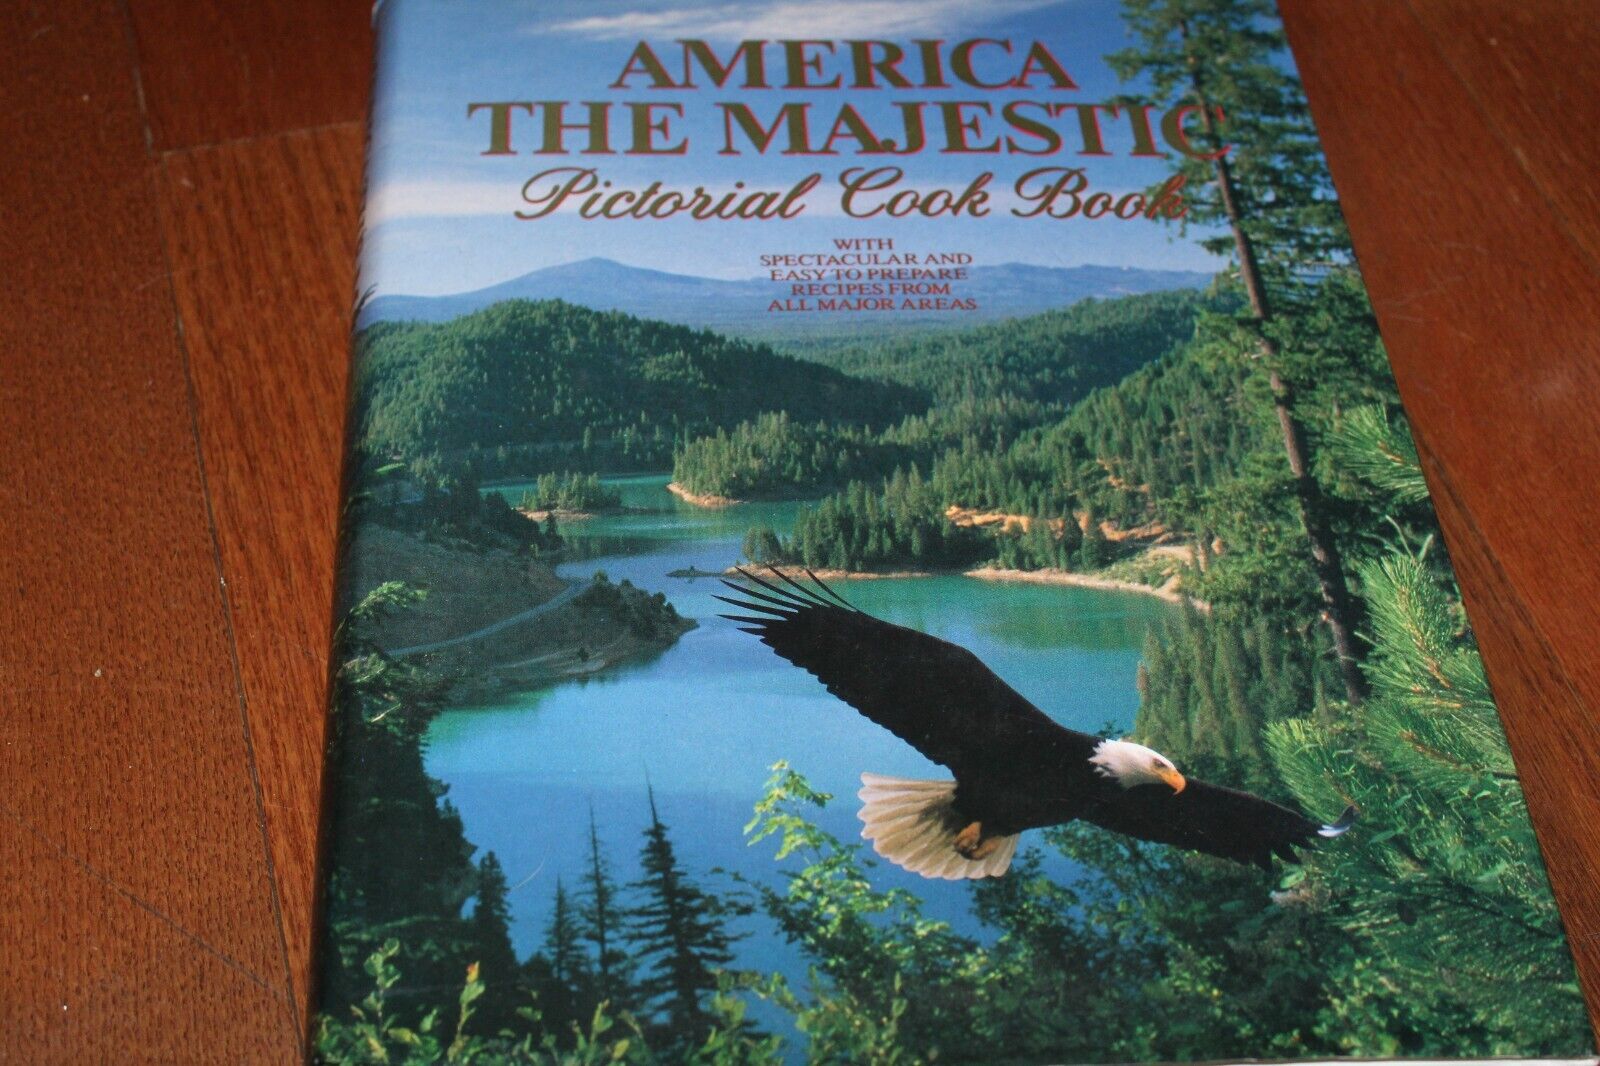 America The Majestic Pictorial Cookbook Over 400 Recipes Coffee Table Travel